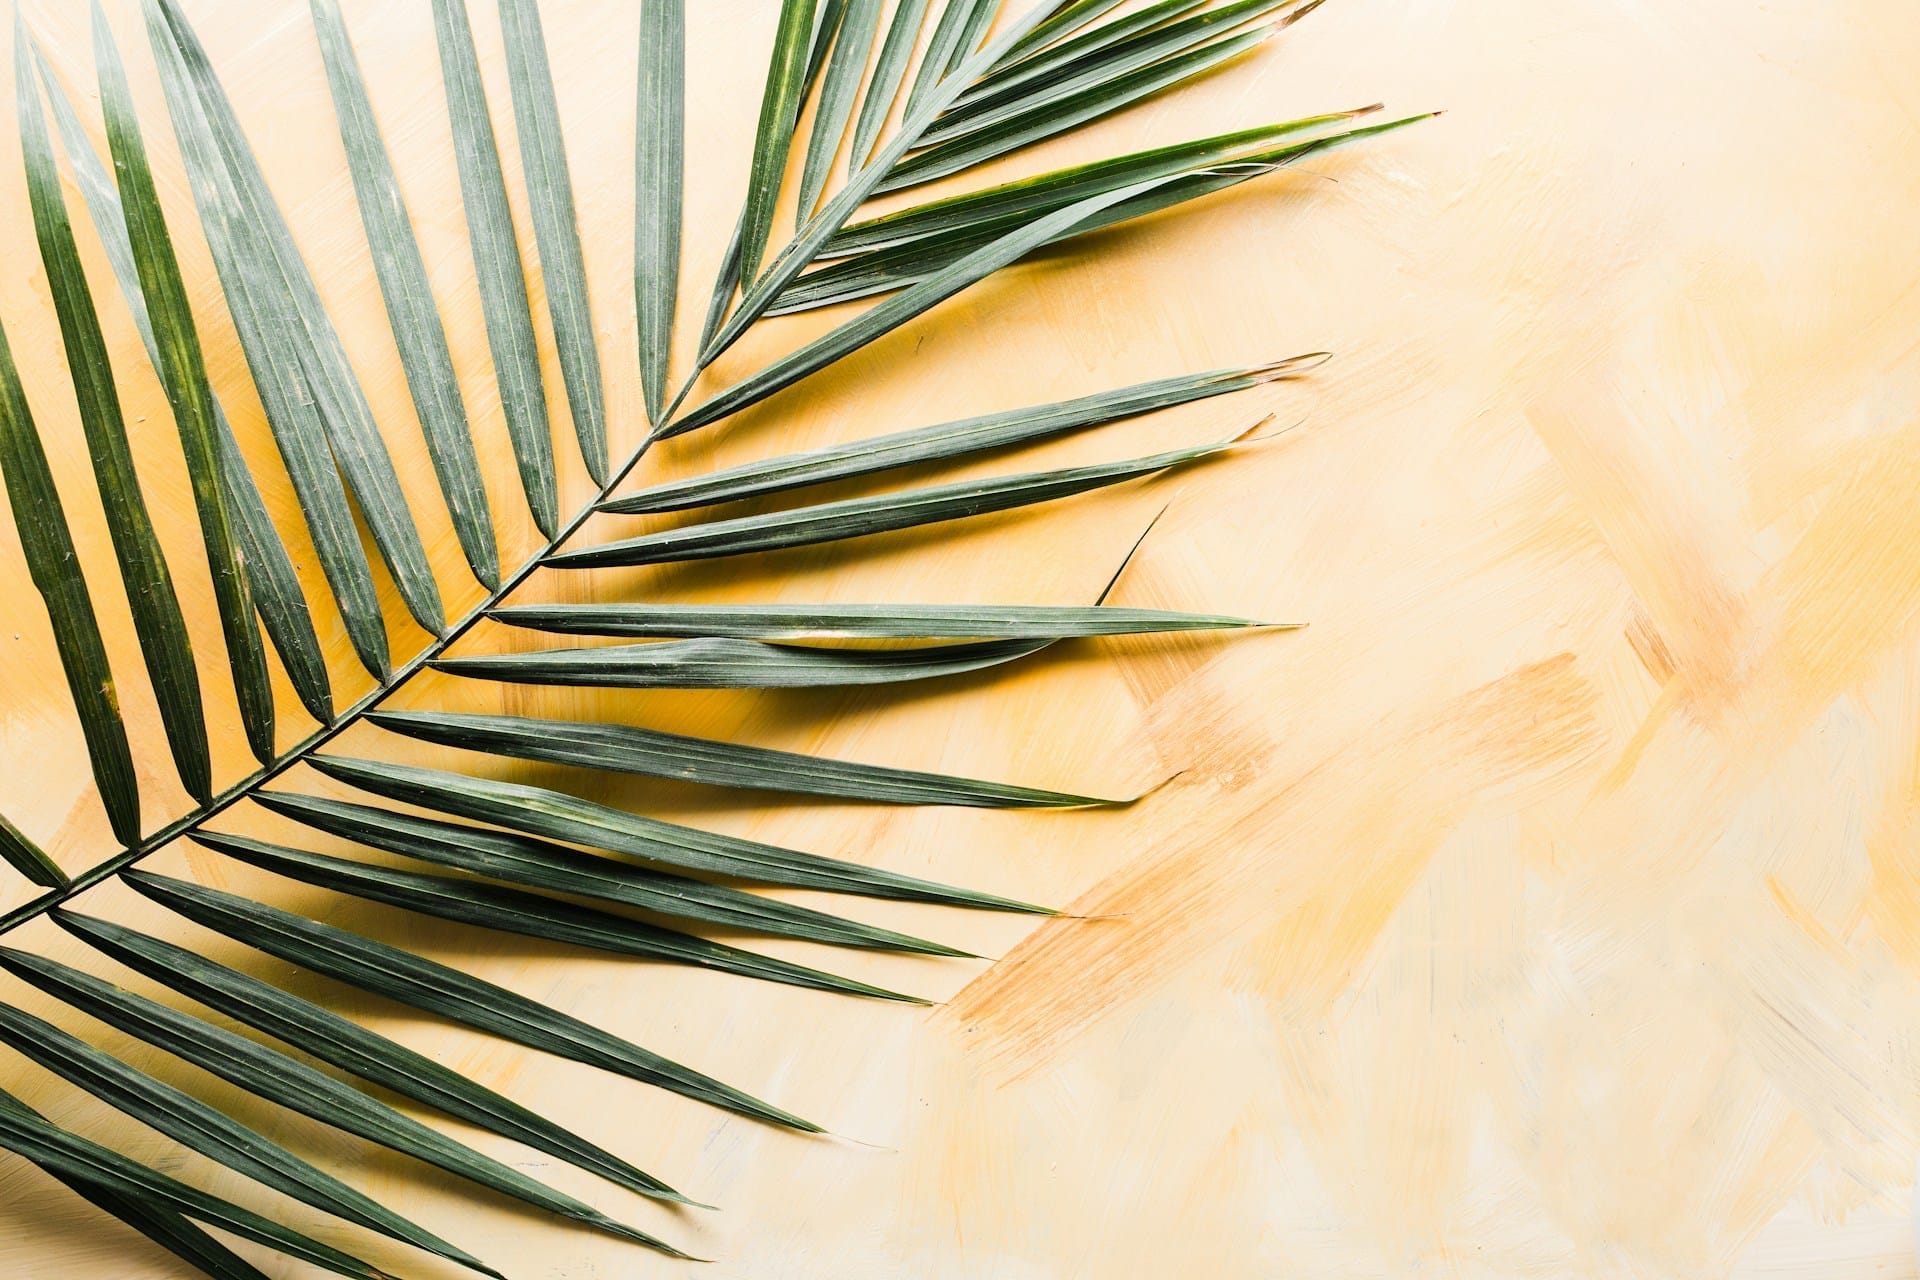 What is Palm Sunday and the meaning behind it? Why do some people wave palm leaves?! We get into these questions and more!